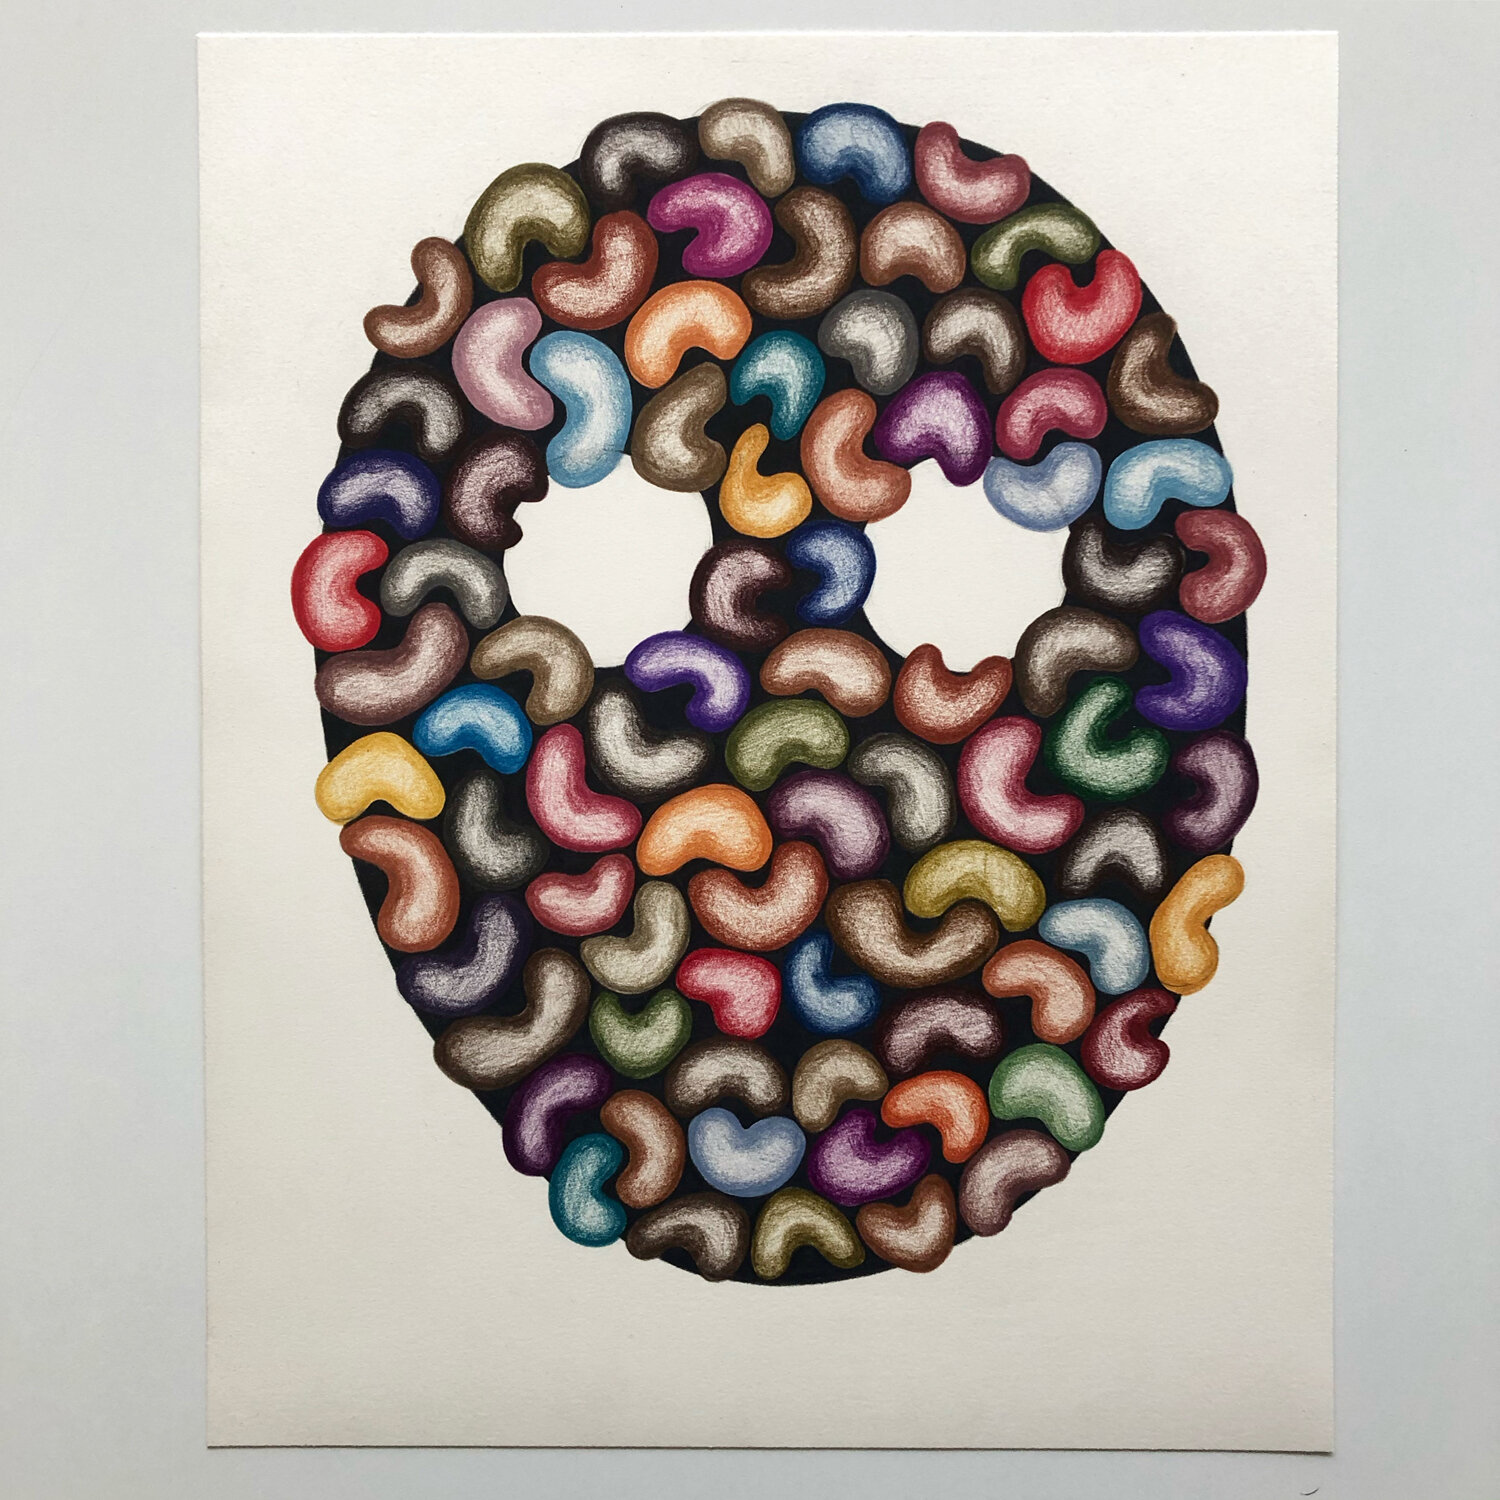 Mask, 2020, colored pencil on paper, 15 x 12"